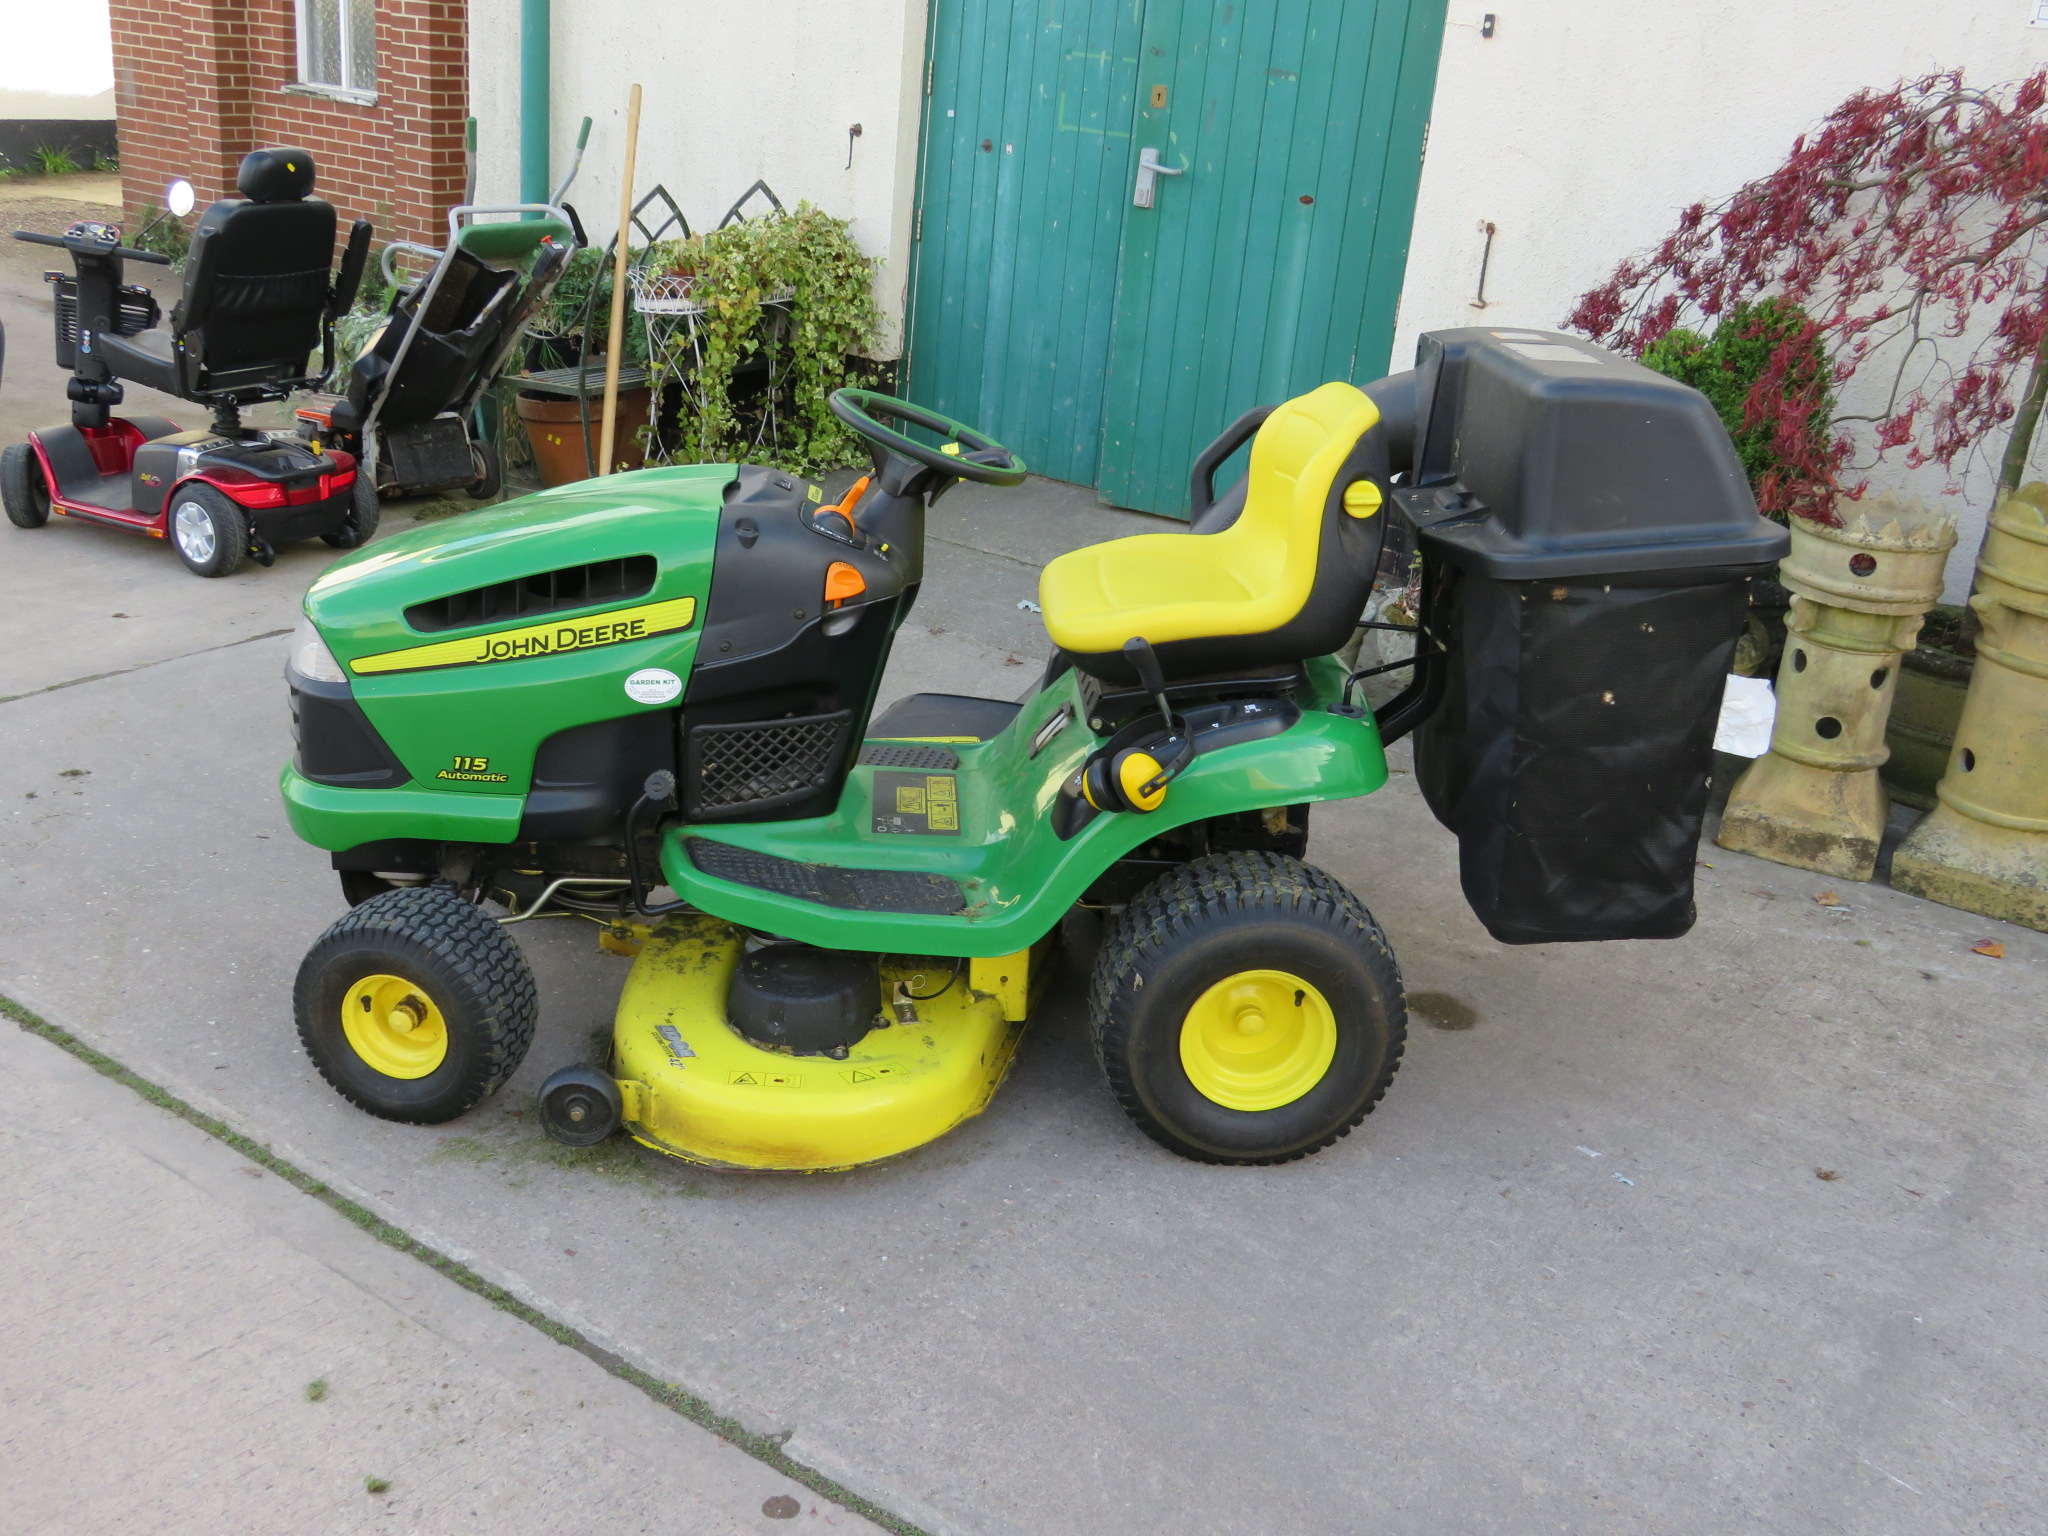 JOHN DEERE 115 AUTOMATIC RIDE ON LAWNMOWER WITH COLLECTION TUBE AND BAGS (INSIDE AUCTION ROOMS ON - Image 5 of 6